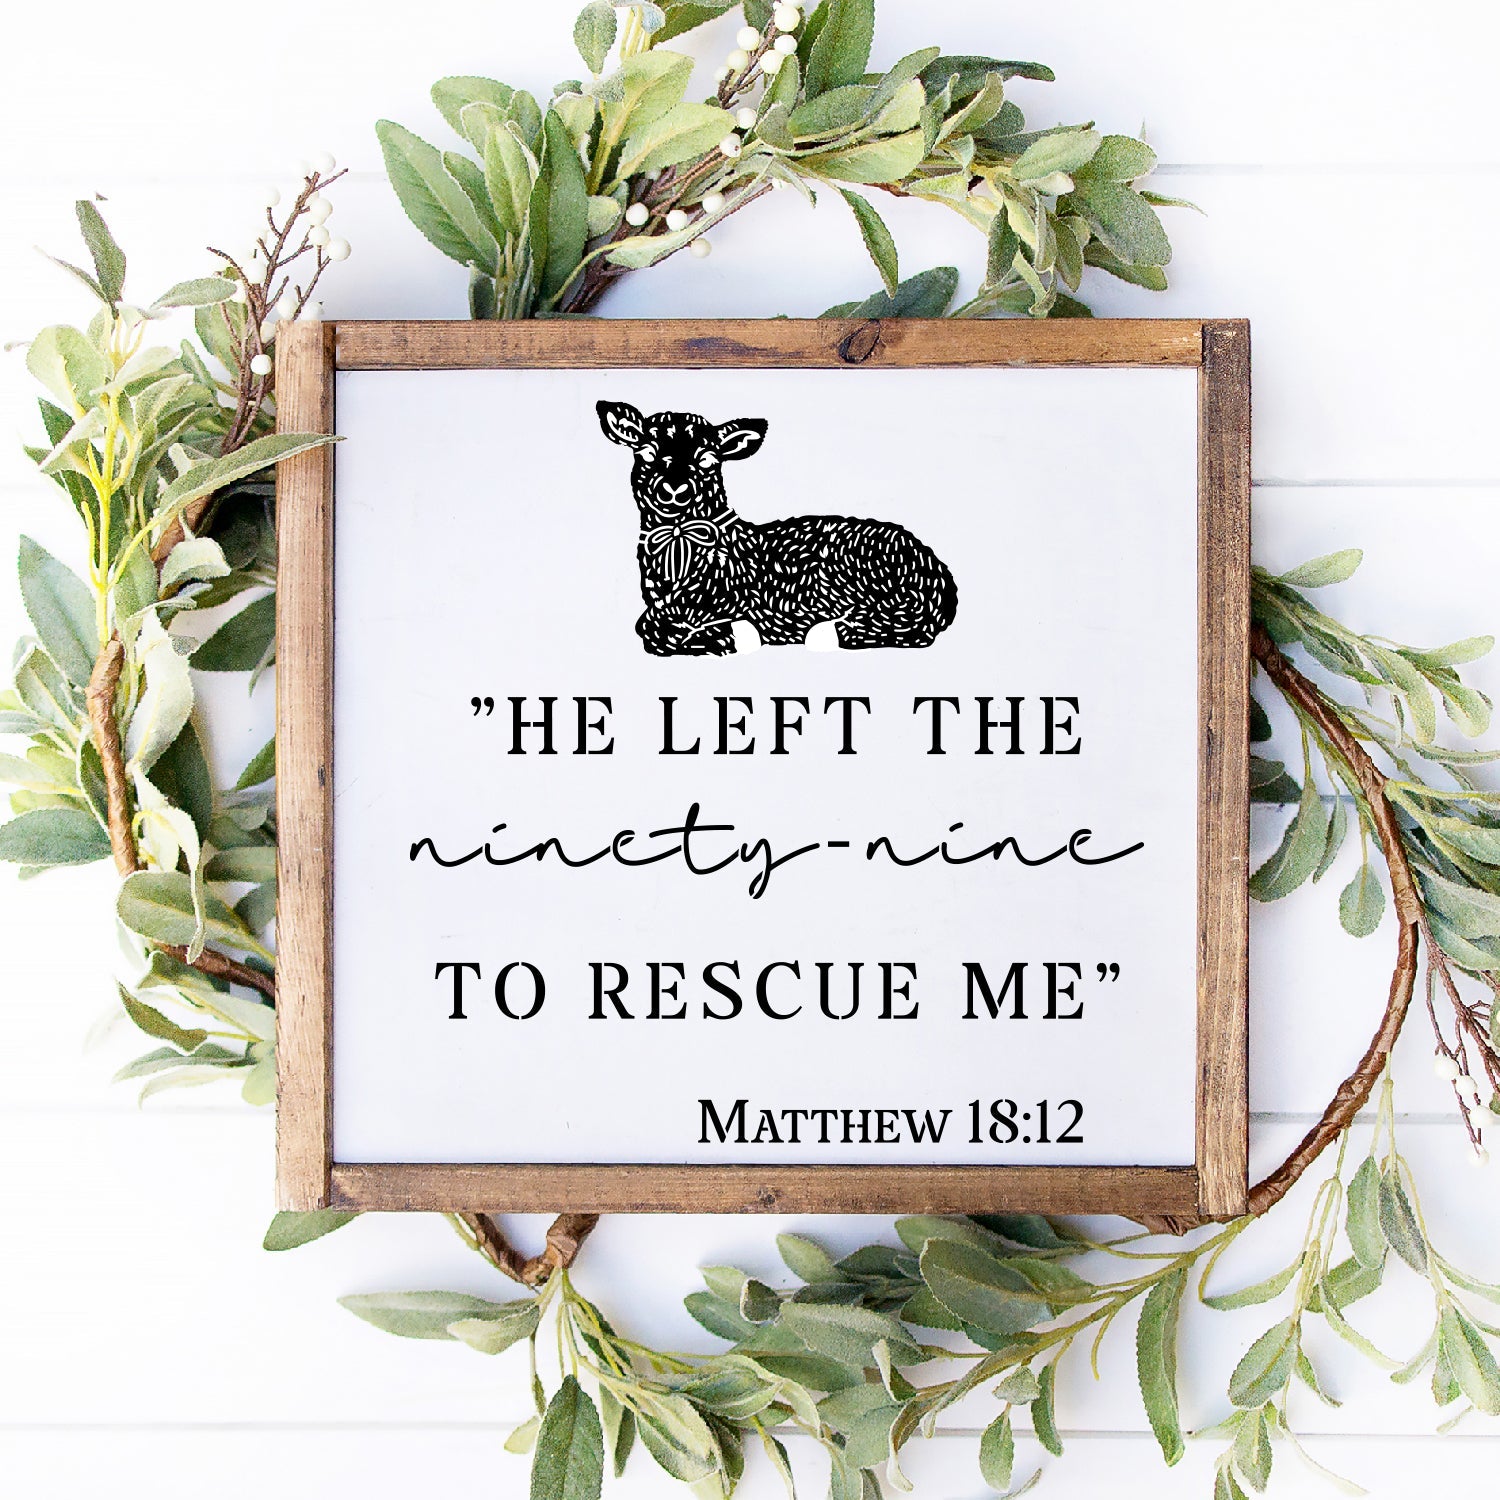 DIY reusable Christian faith scripture wood sign stencil, he left the 99, He left the ninety-nine to rescue me  -Matthew 18:12,  christian home decor, arts and crafts, upcycling, bible verse wall art, scripture sign reusable stencil